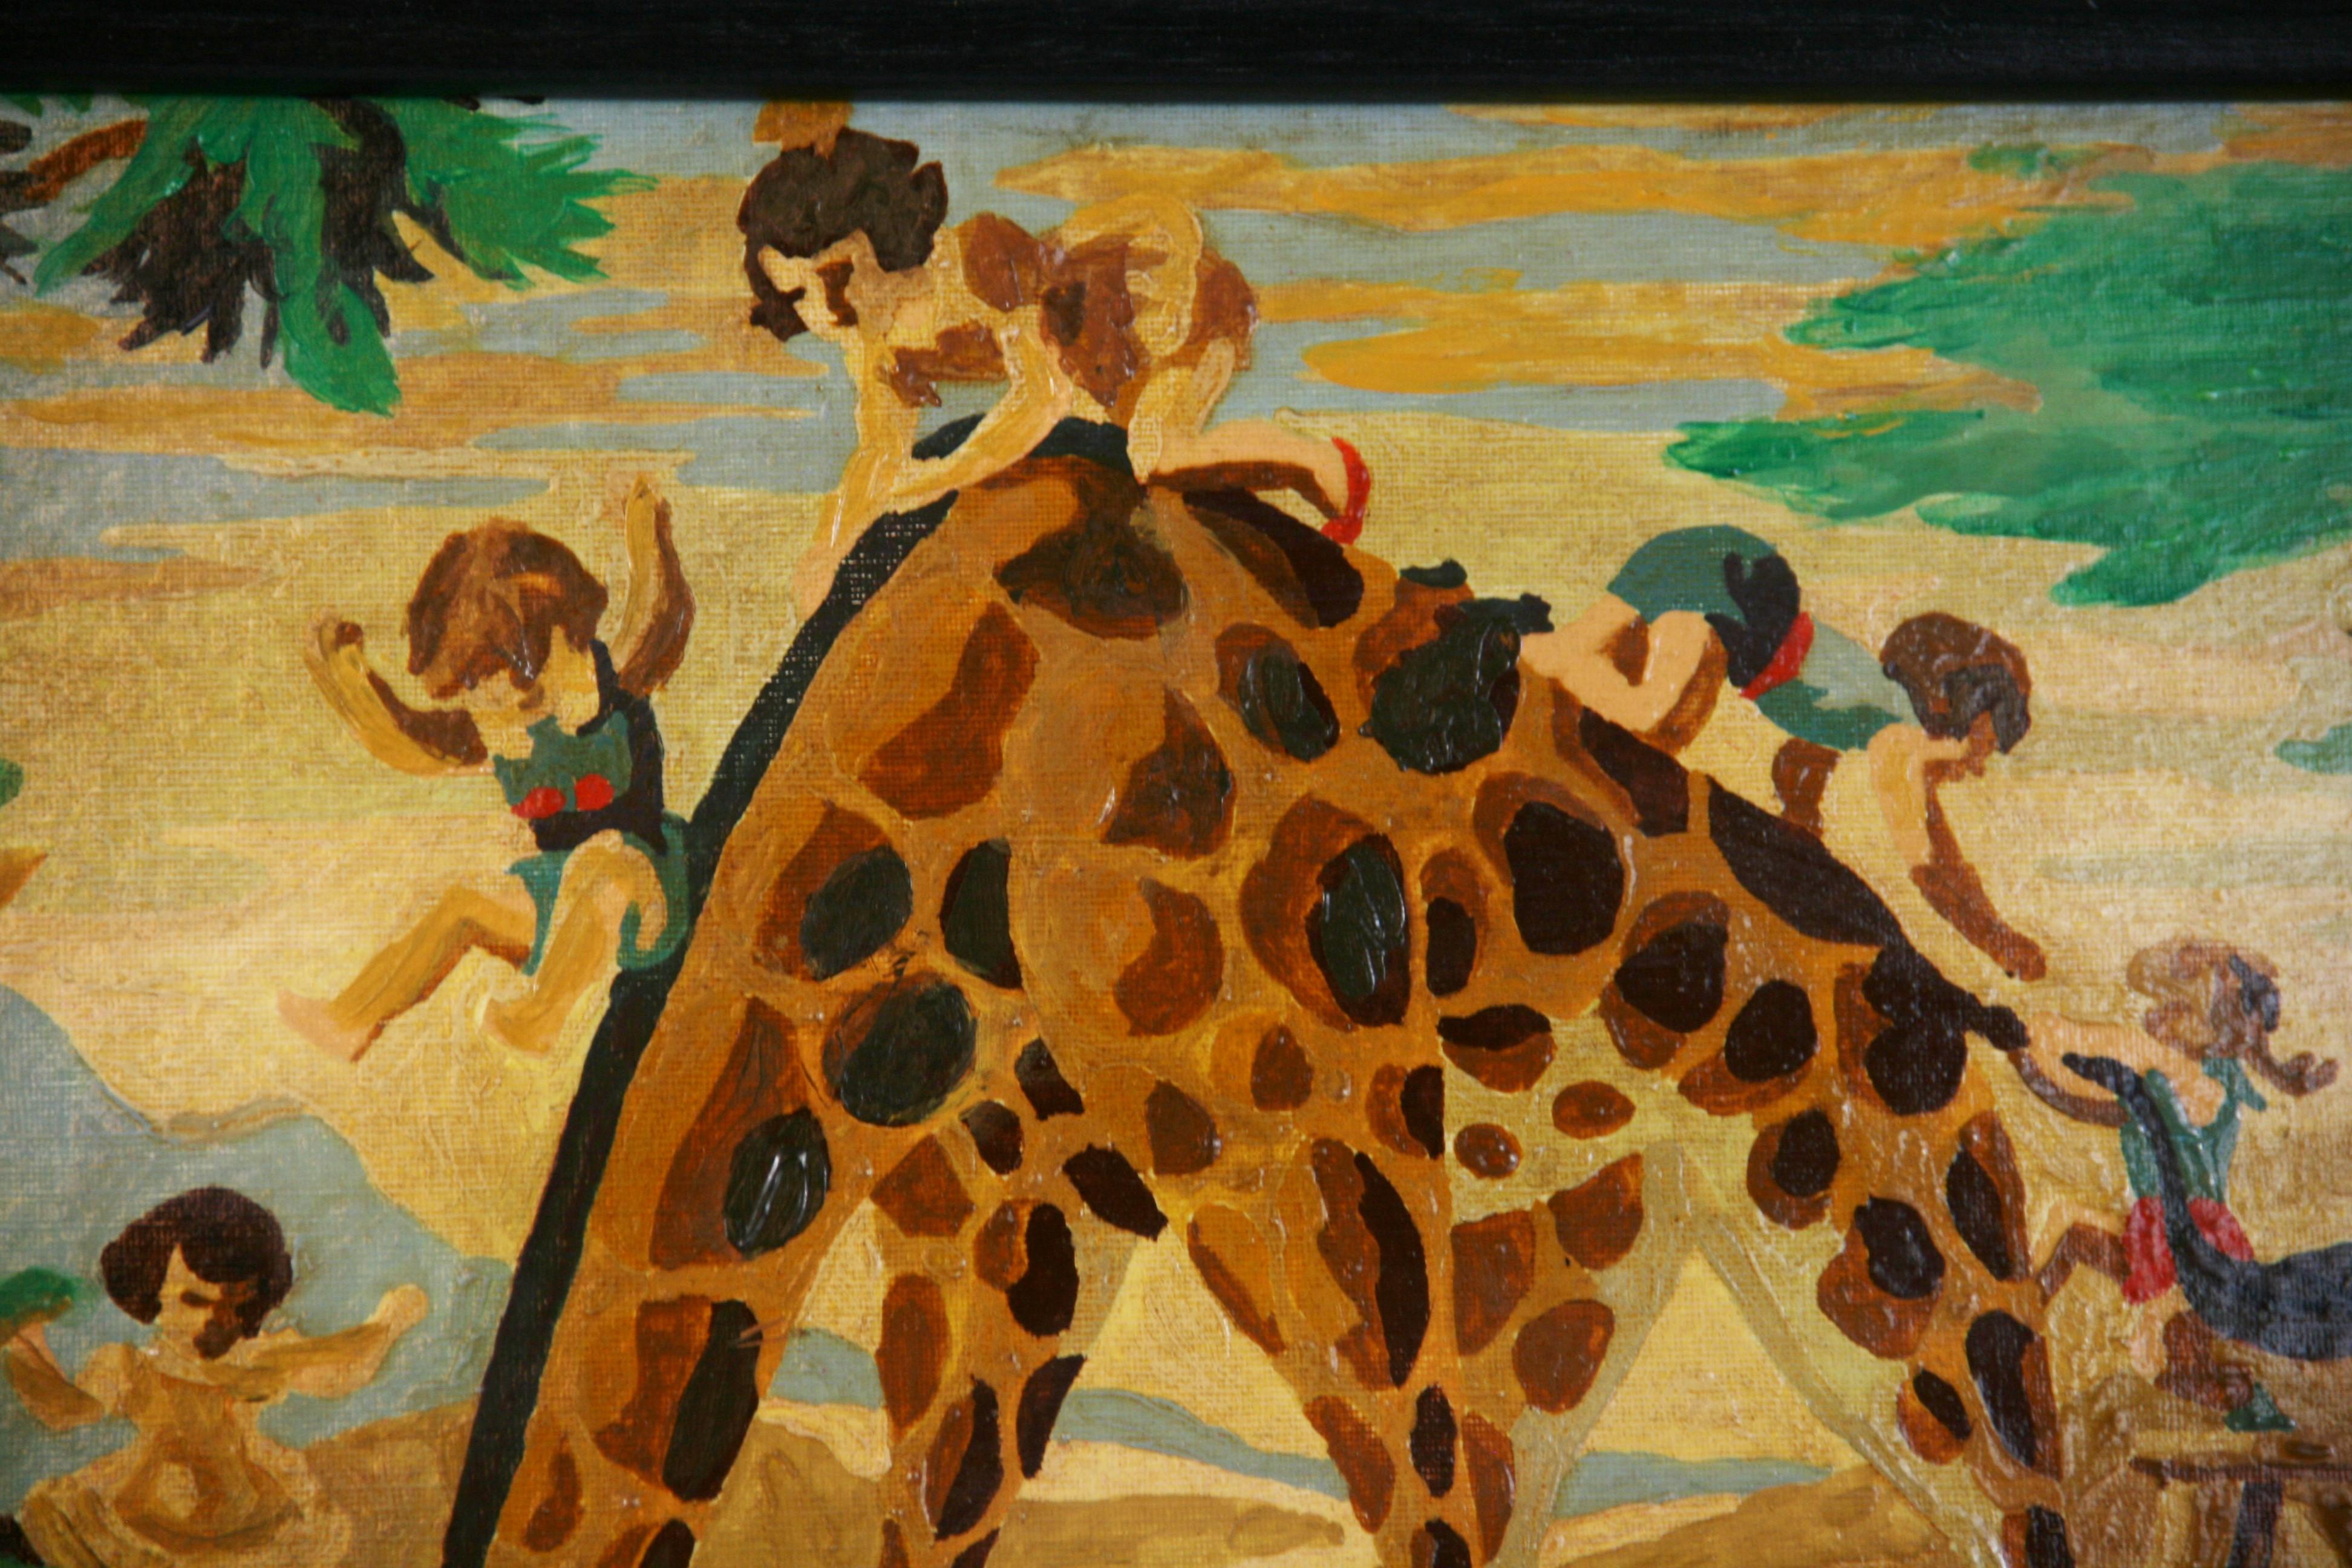 Riding a Giraffe Surreal  Oil Painting 1956 For Sale 4